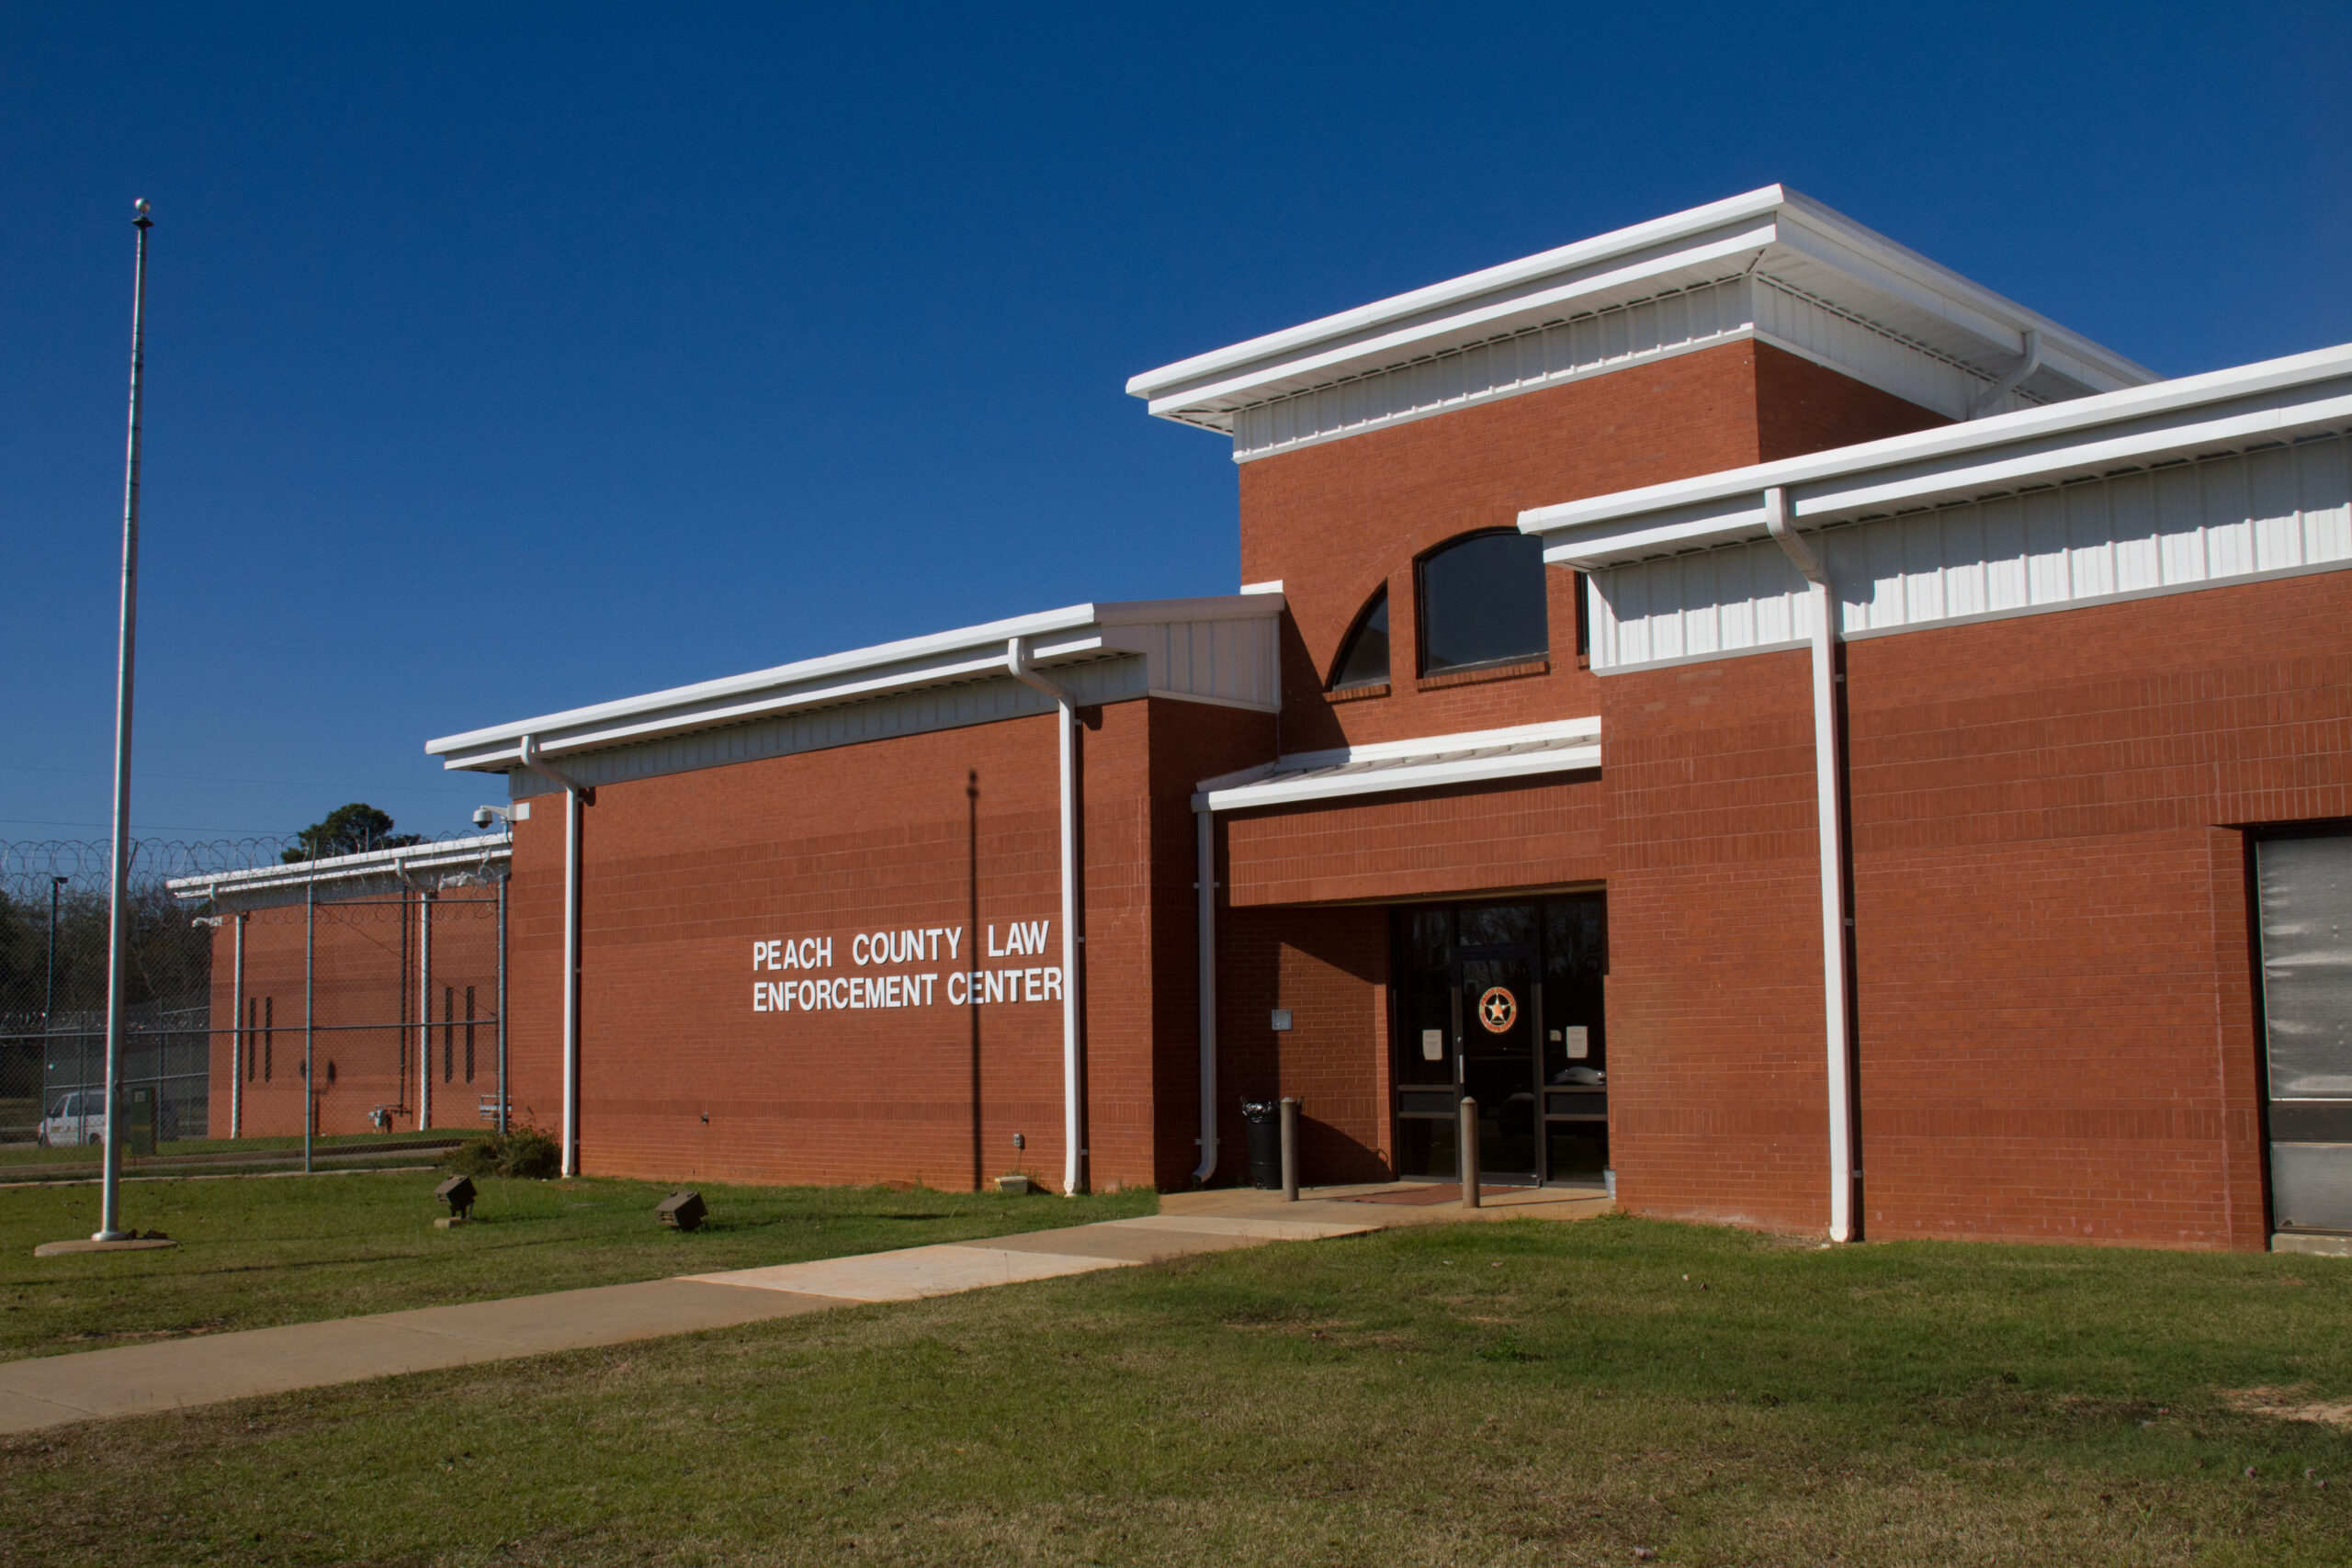 Expansion of the Peach County Jail Center finished